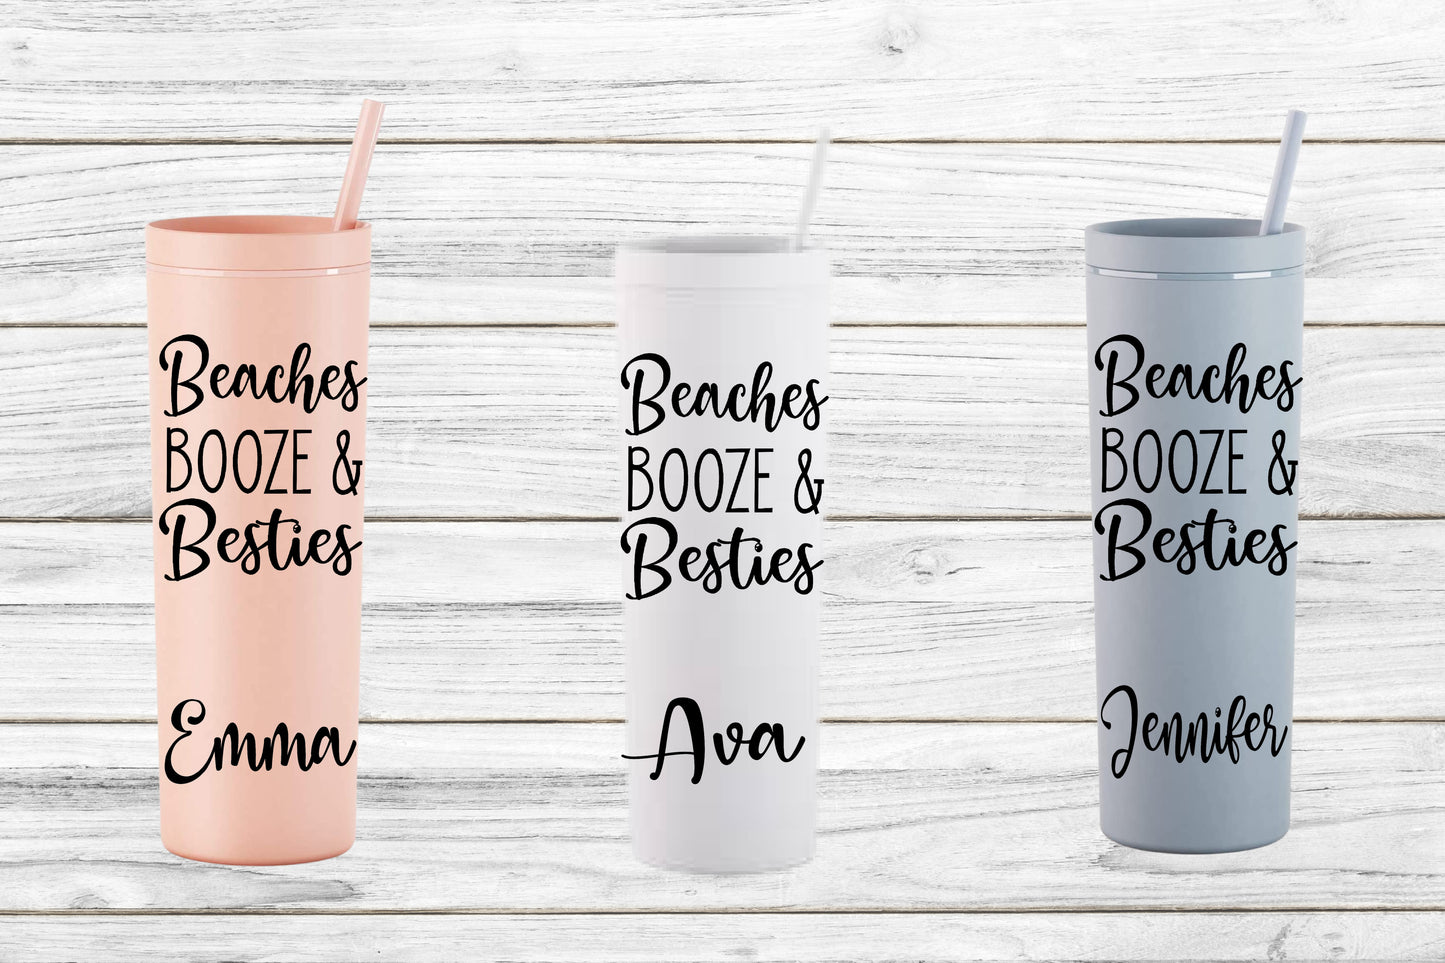 Beaches Booze & Besties Vacation Tumblers, Girls Trip Cups, Beach Vacation 18 oz Acrylic Skinny Cup with Straw, Bachelorette Cups,